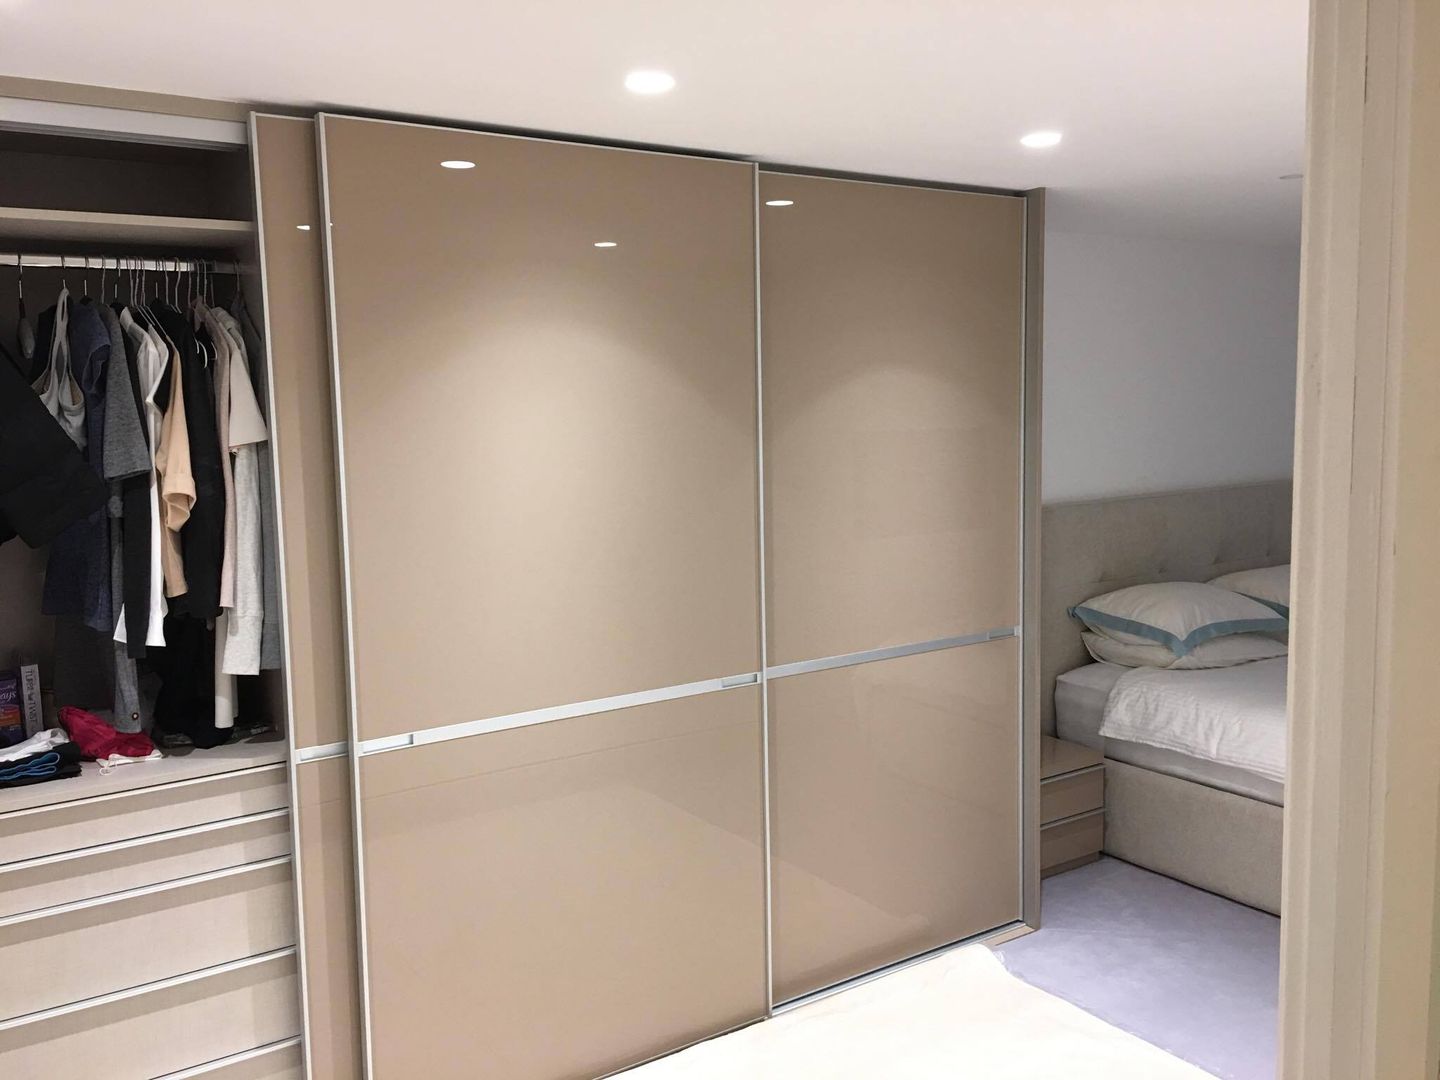 Fitted sliding door wardrobe - Minimalist Style Sliding Doors Kleiderhaus ltd Phòng ngủ phong cách hiện đại fitted furniture,fitted bedrooms,fitted wardrobes,sliding doors,sliding wardrobes,furniture london,kleiderhaus,bespoke joinery,made to measure,gloss wardrobes,wardrobes,wardrobes london,Wardrobes & closets